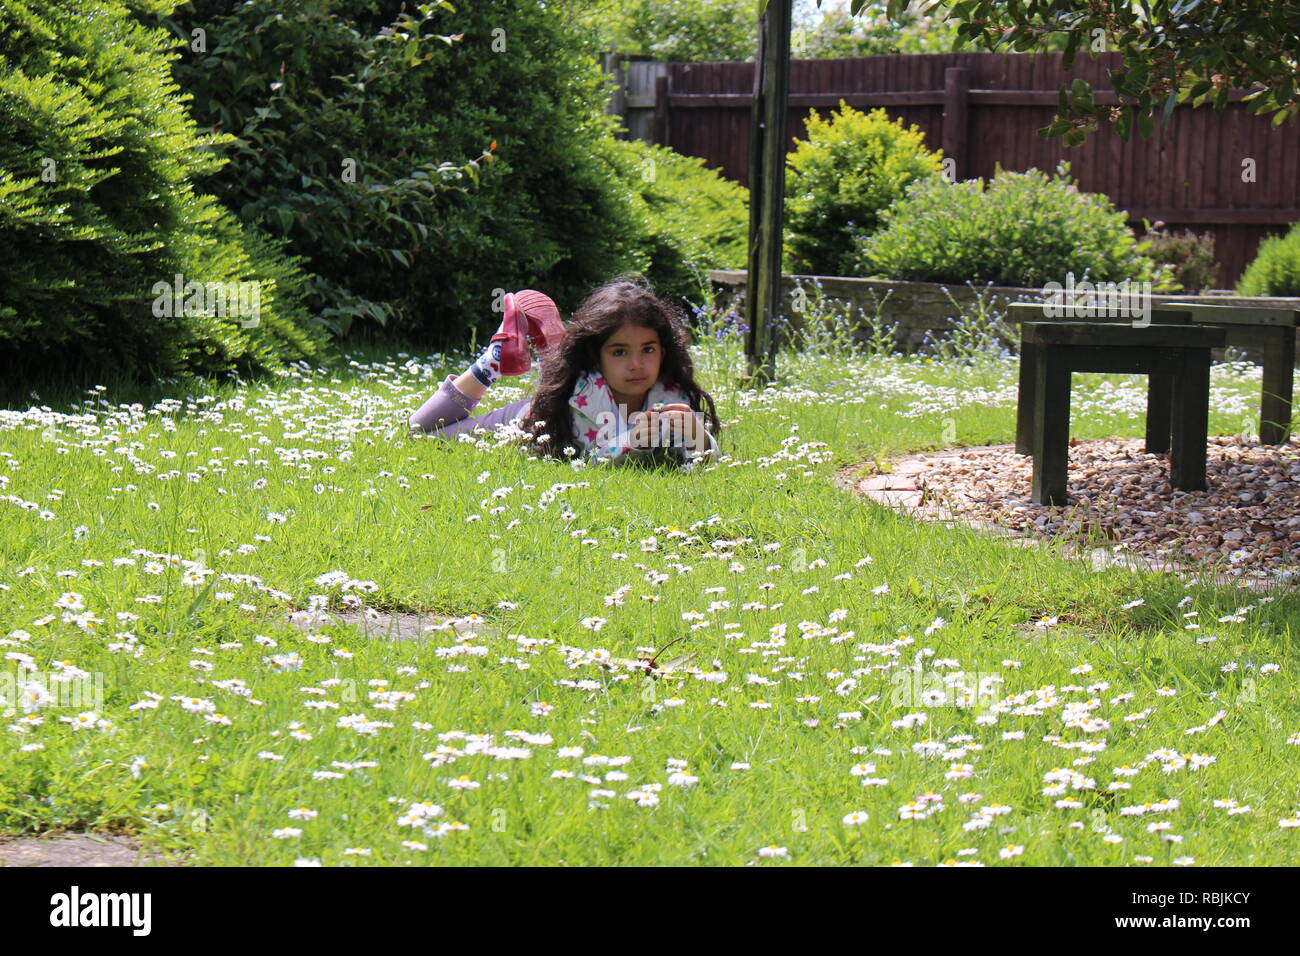 girl lieing in garden with daisys Stock Photo